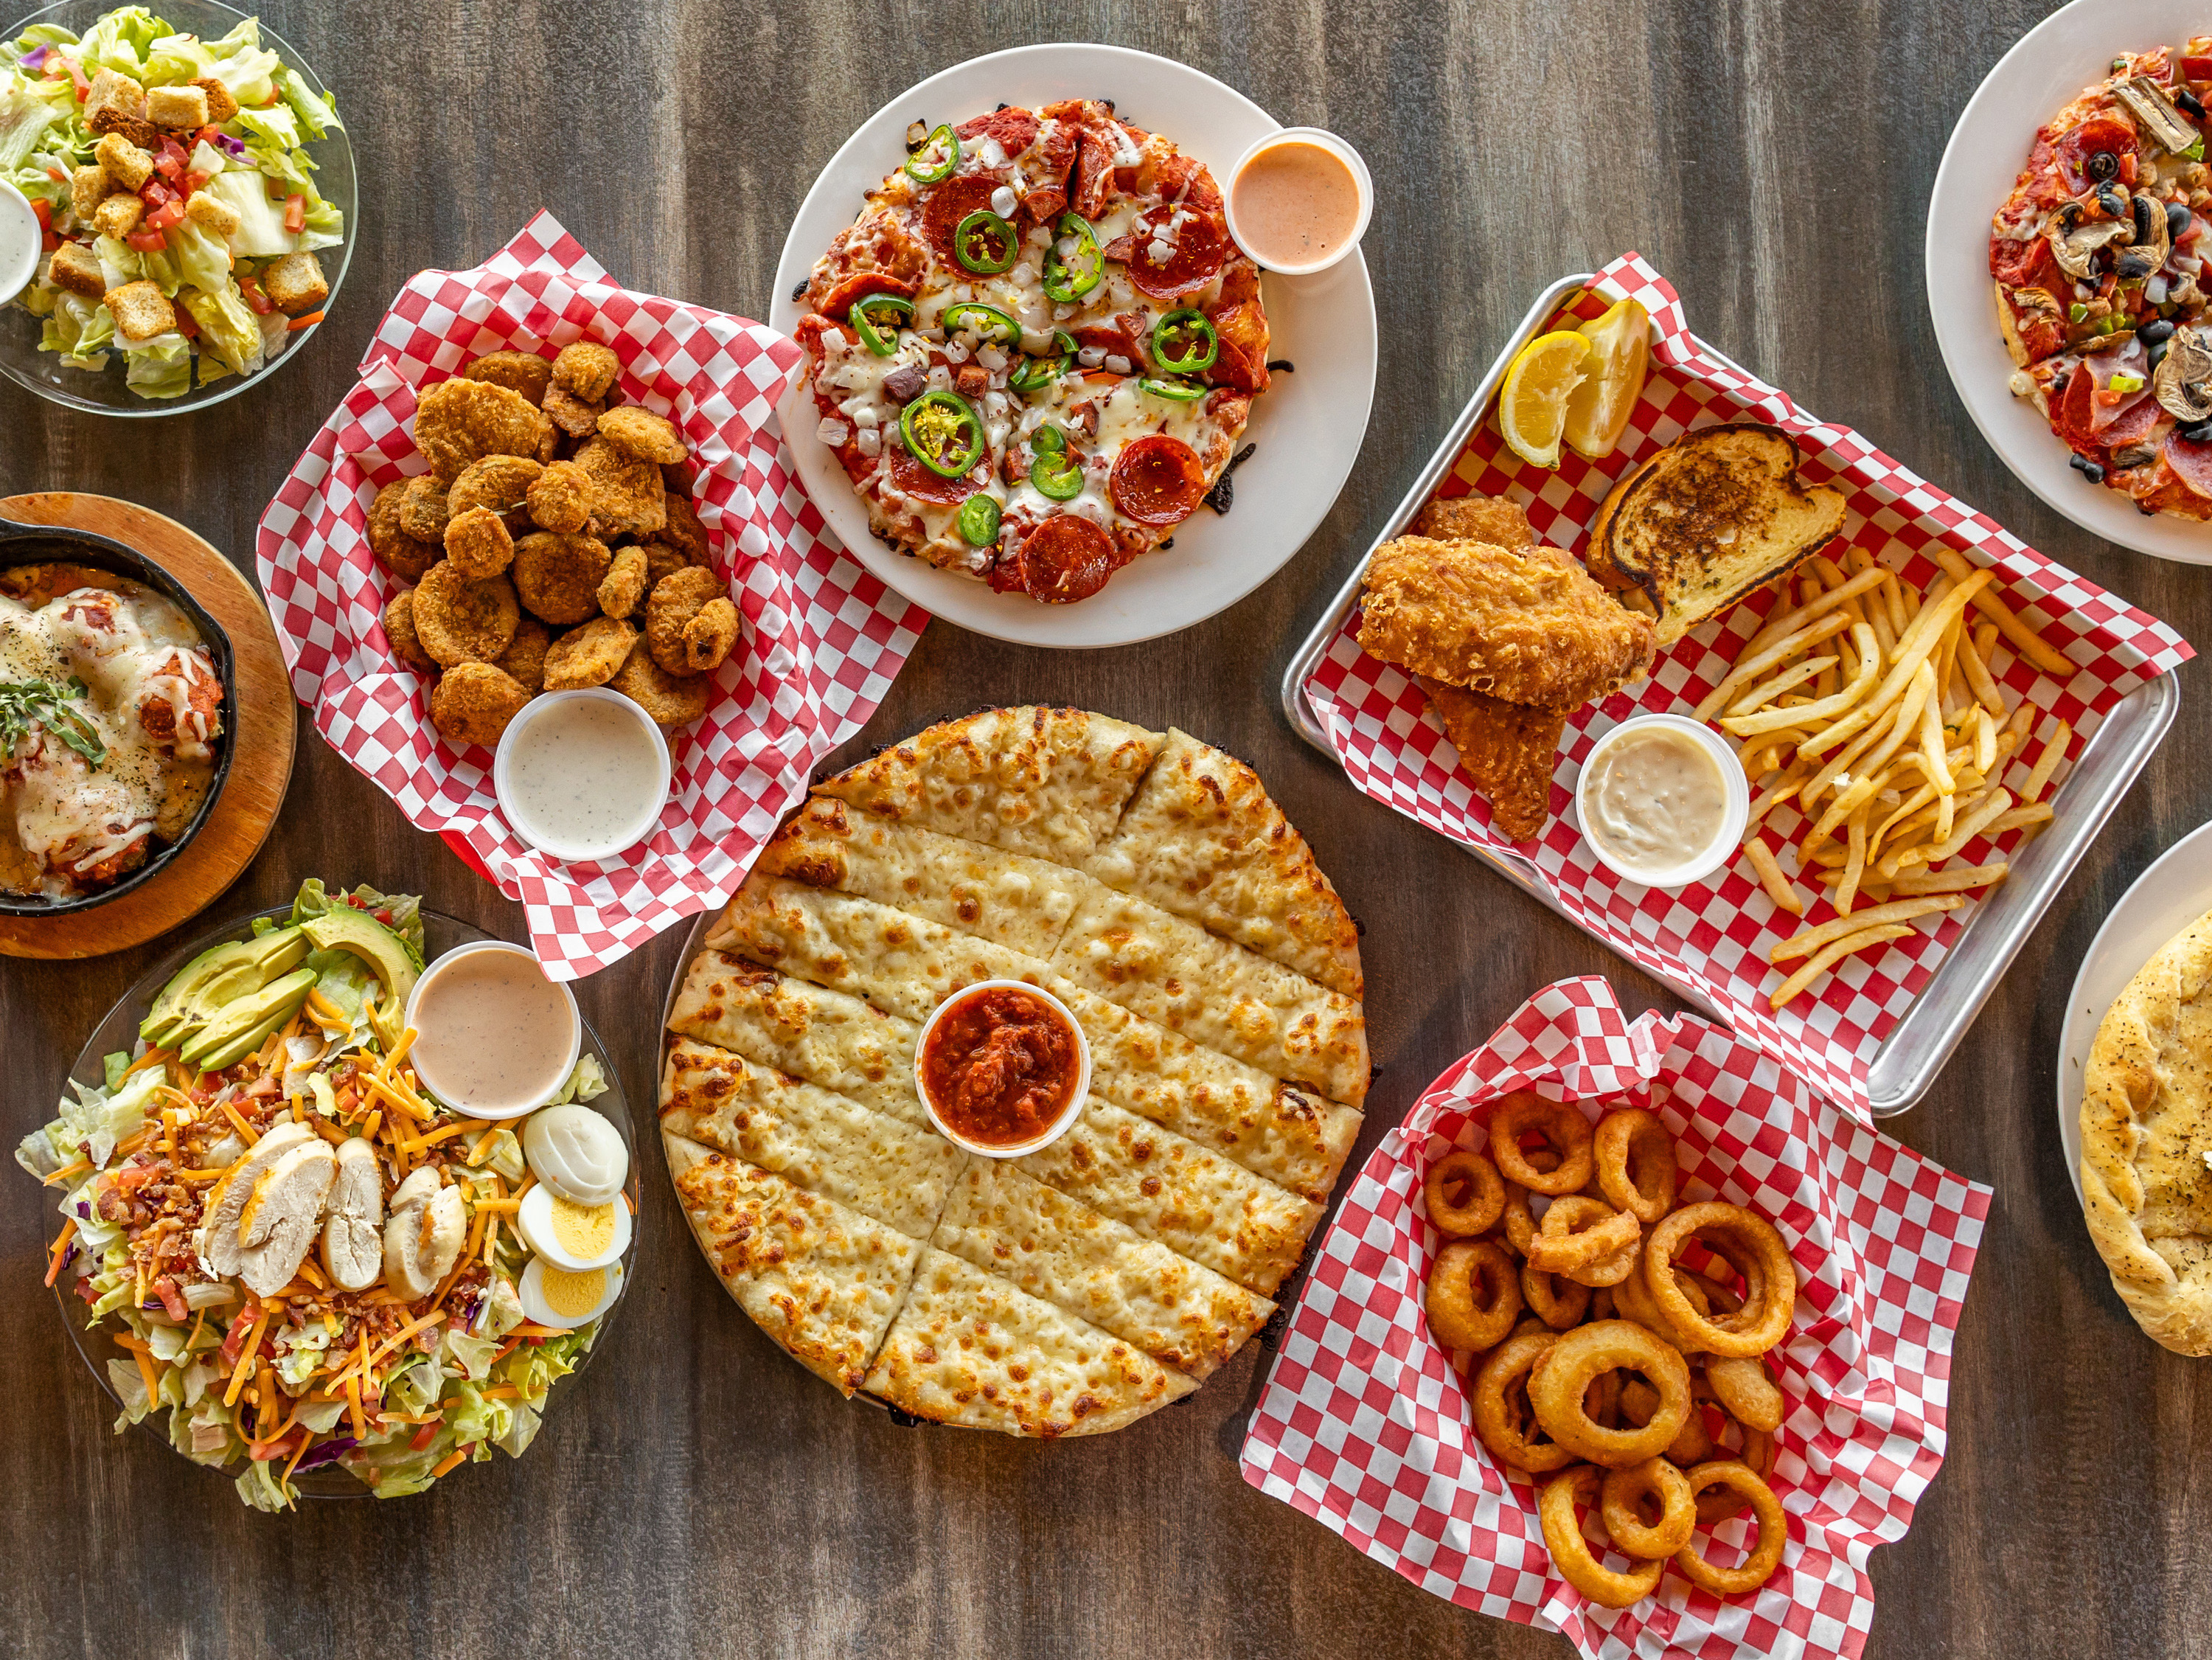 A look down on several dishes of food including salad, breadsticks, onion rings, fried pickles, pizza, and fish & chips